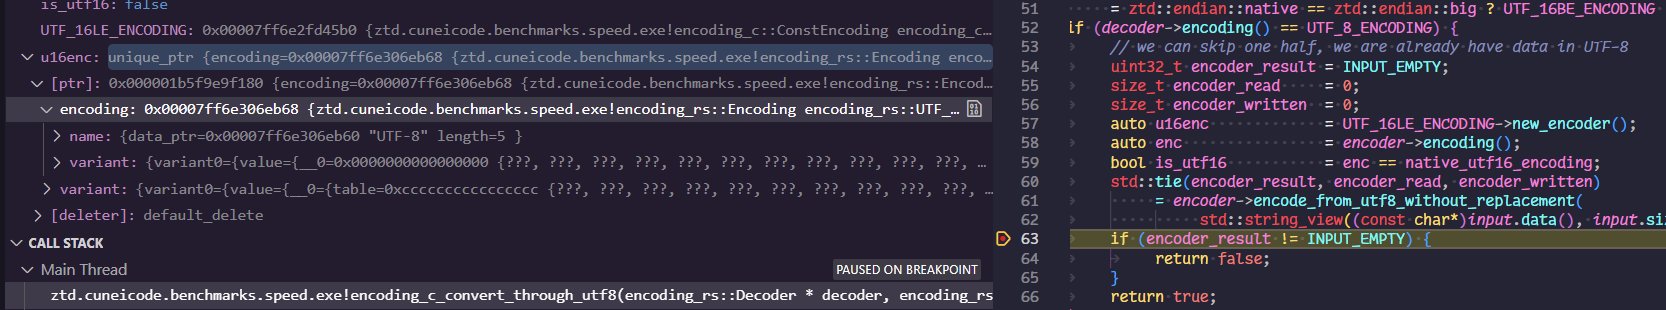 A screenshot showing the Visual Studio Code debugger, highlighting a variable called "u16enc". The variable was initialized using "auto u16enc = UTF_16LE_ENCODING->new_encoder();" which produced a type of "std::unique_ptr<encoding_rs::Encoder>". Inspecting the variable in the left-hand-side panel and checking deep into its data members, it reveals that it has a name of "UTF-8" and not "UTF-16".